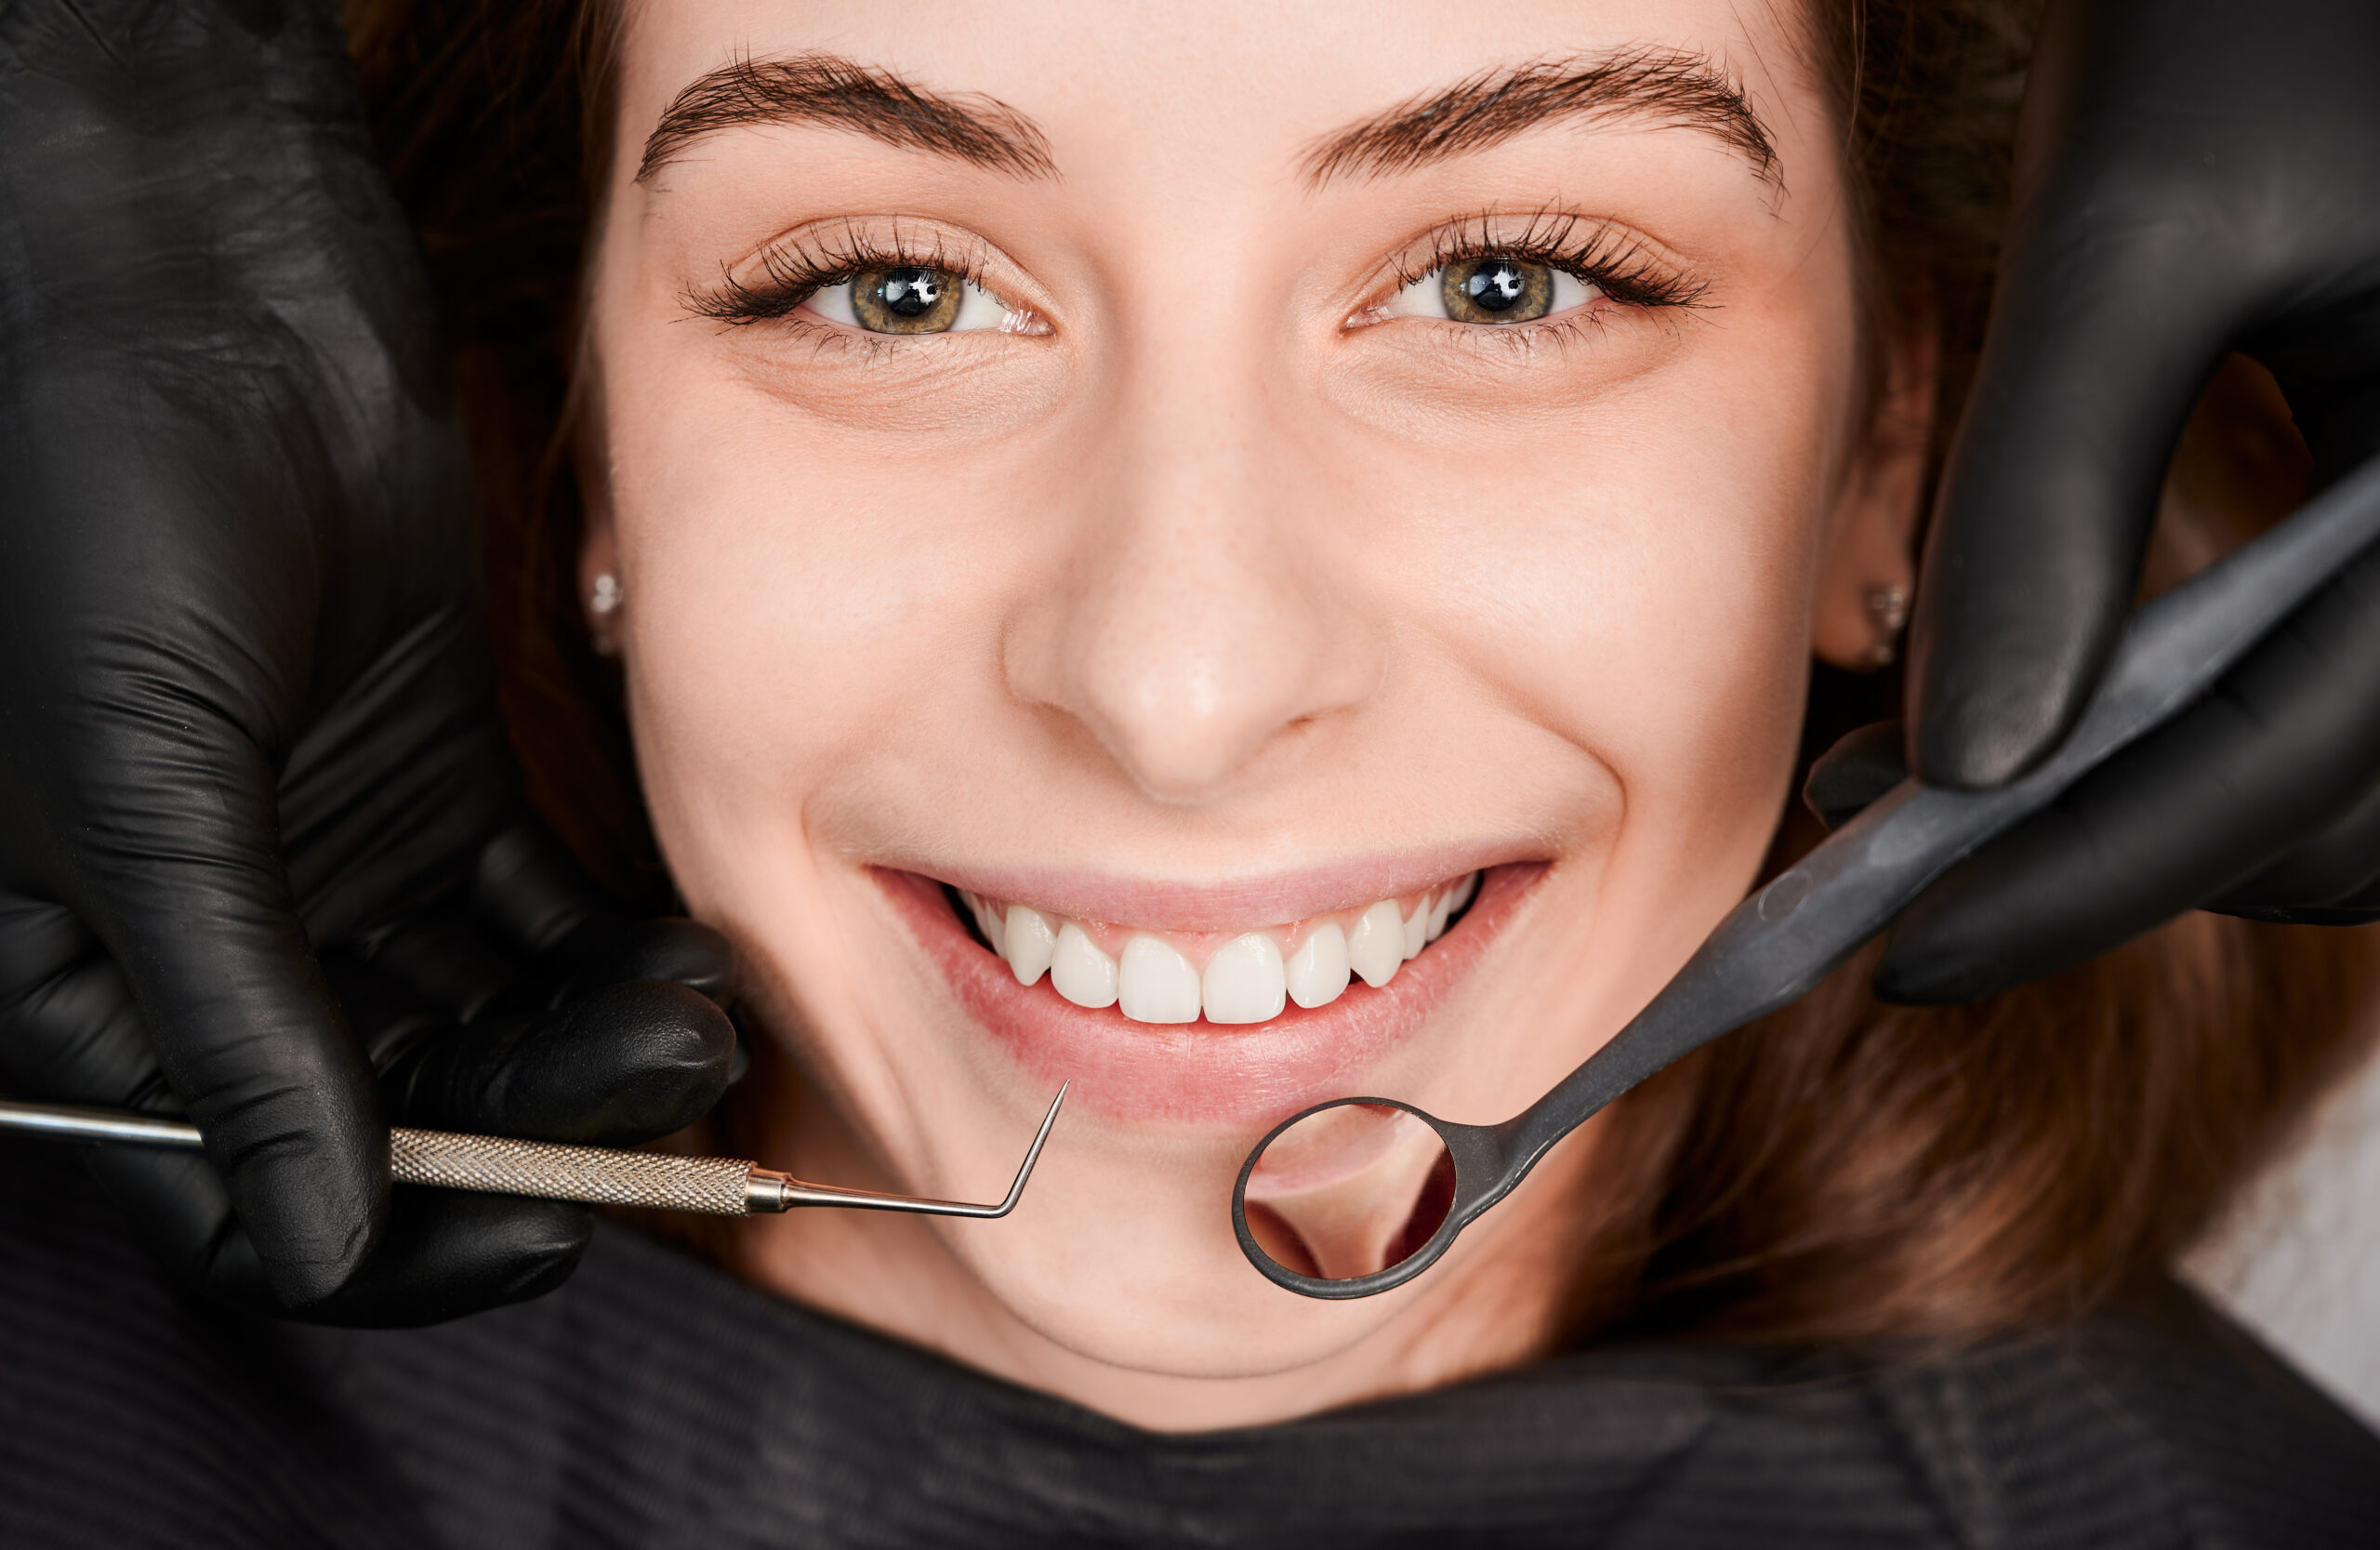 cosmetic dentist - what to expect at a cosmetic dentist - girl with a good smile.